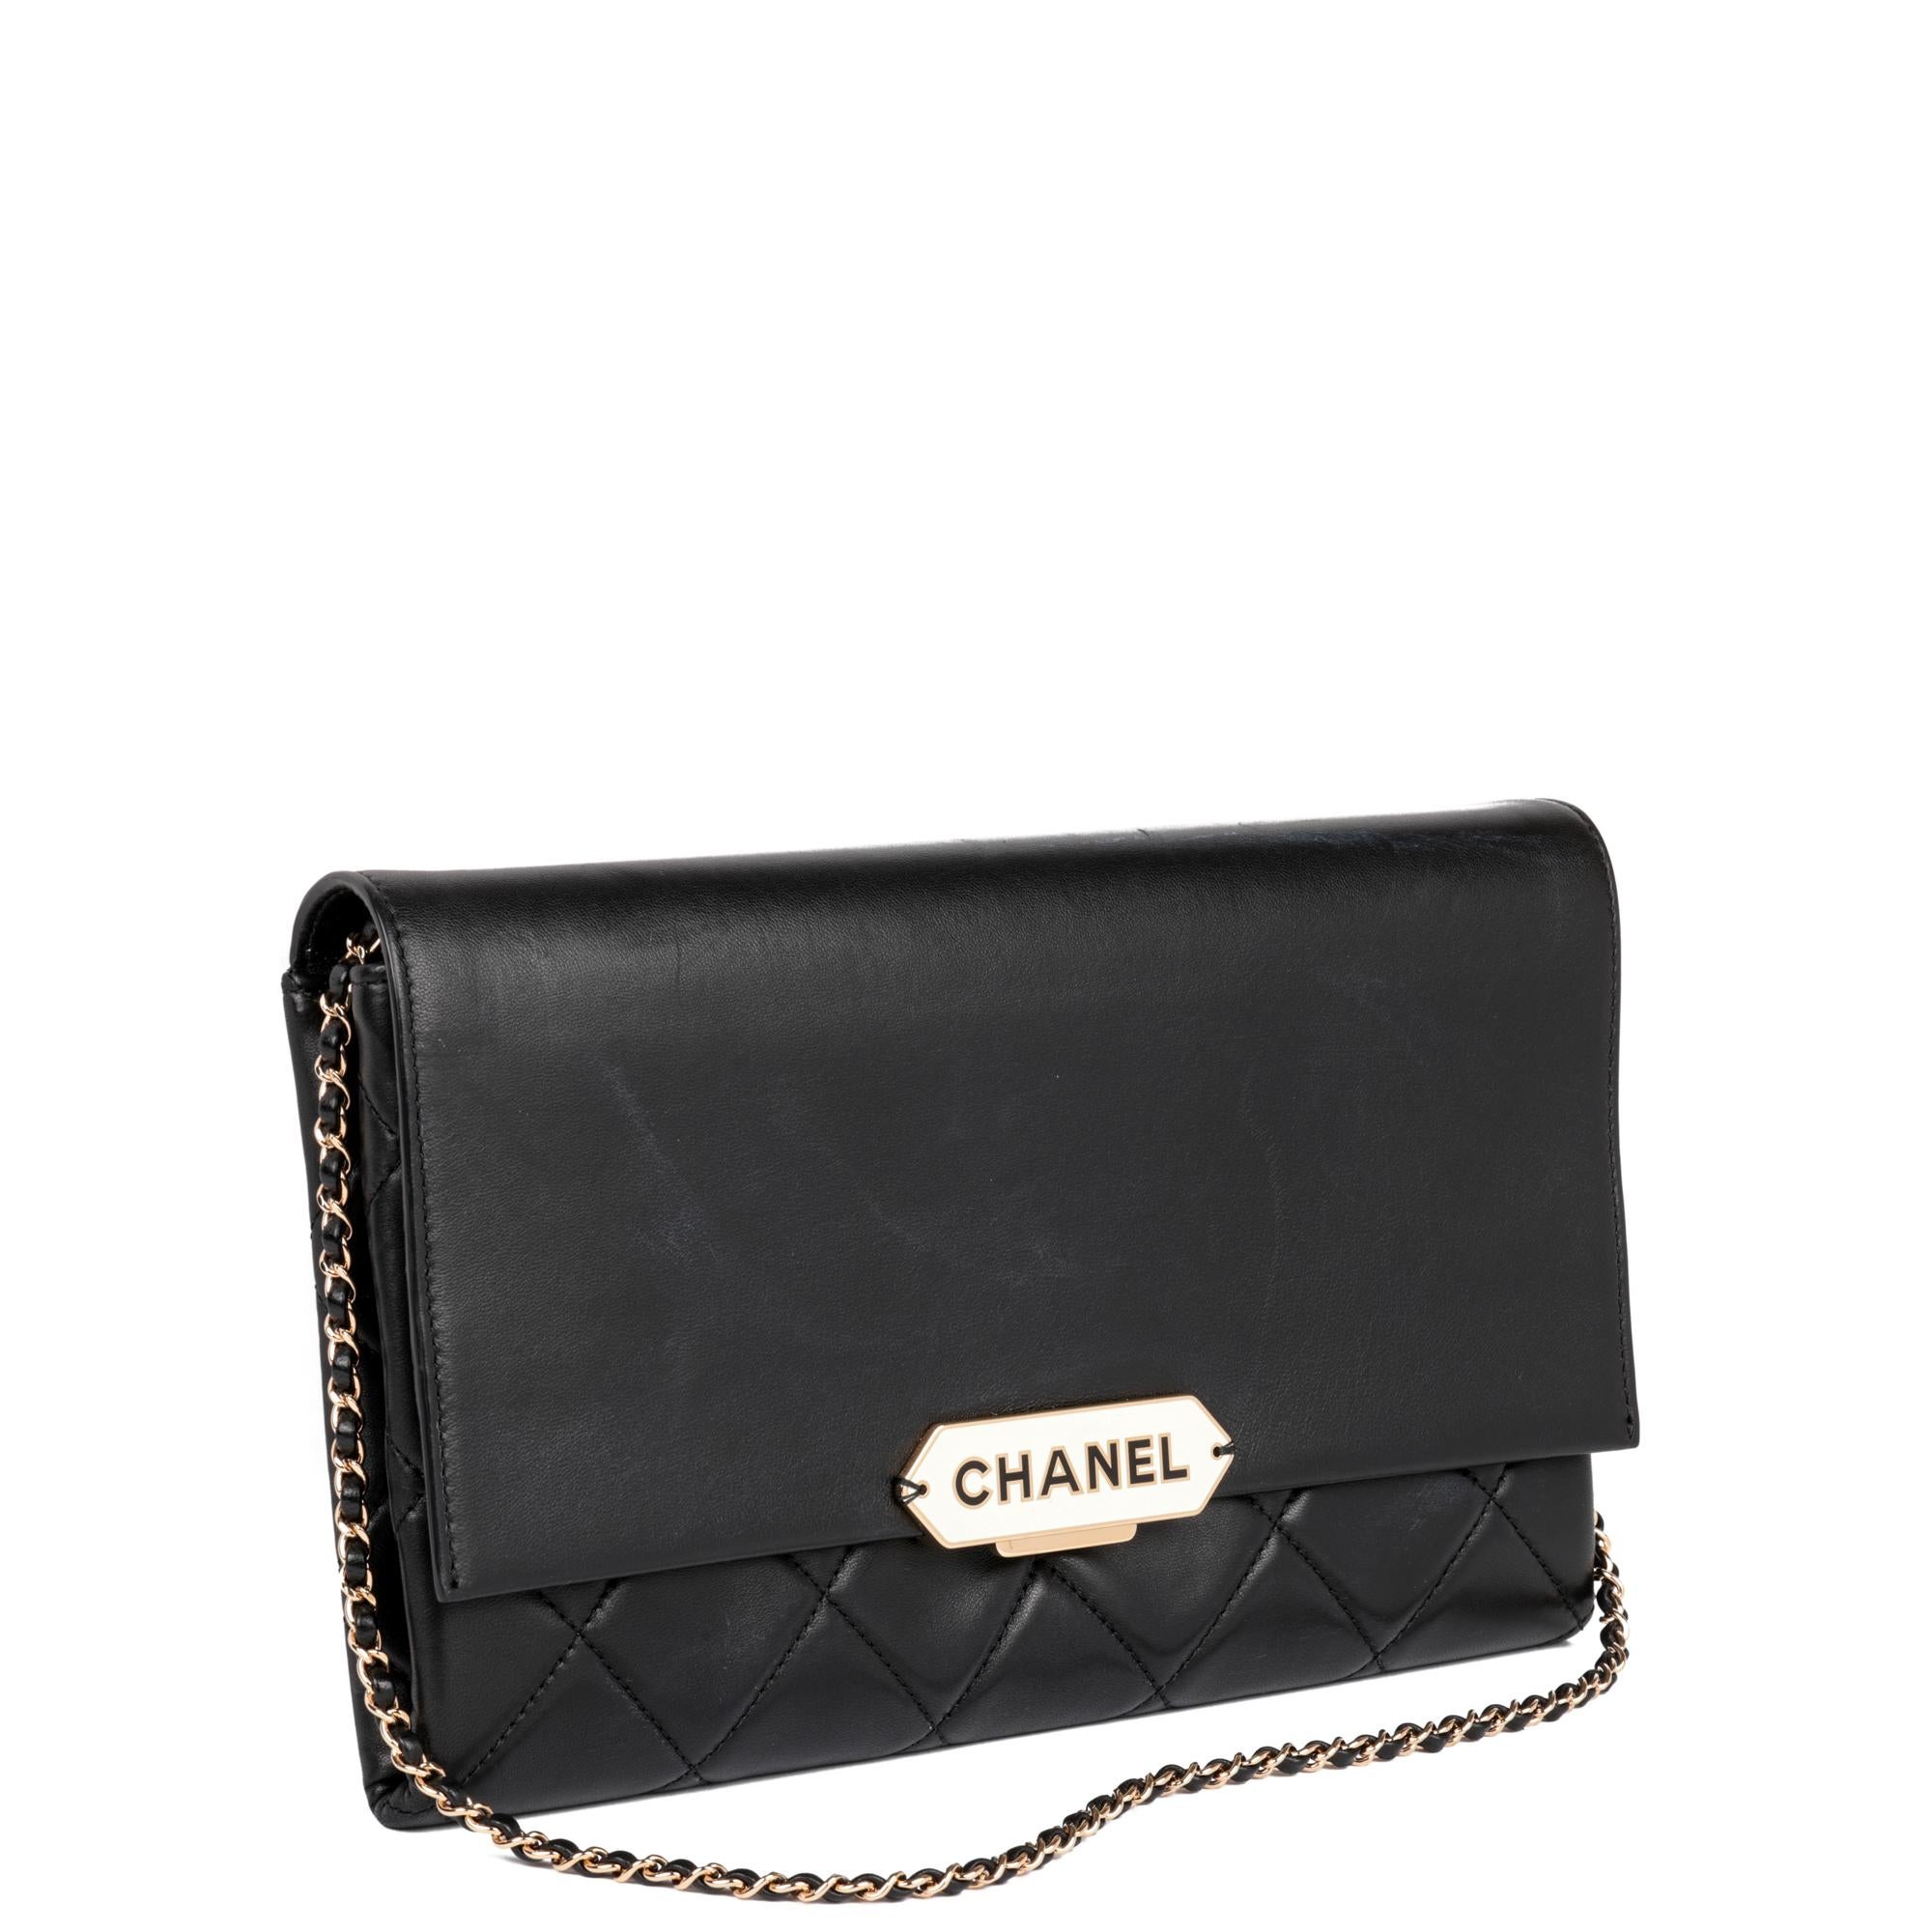 CHANEL
Black Quilted Lambskin Retro Label Clutch-on-Chain COC

Xupes Reference: CB852
Serial Number: 23434846
Age (Circa): 2017
Accompanied By: Authenticity Card
Authenticity Details: Authenticity Card, Serial Sticker (Made in Italy)
Gender: